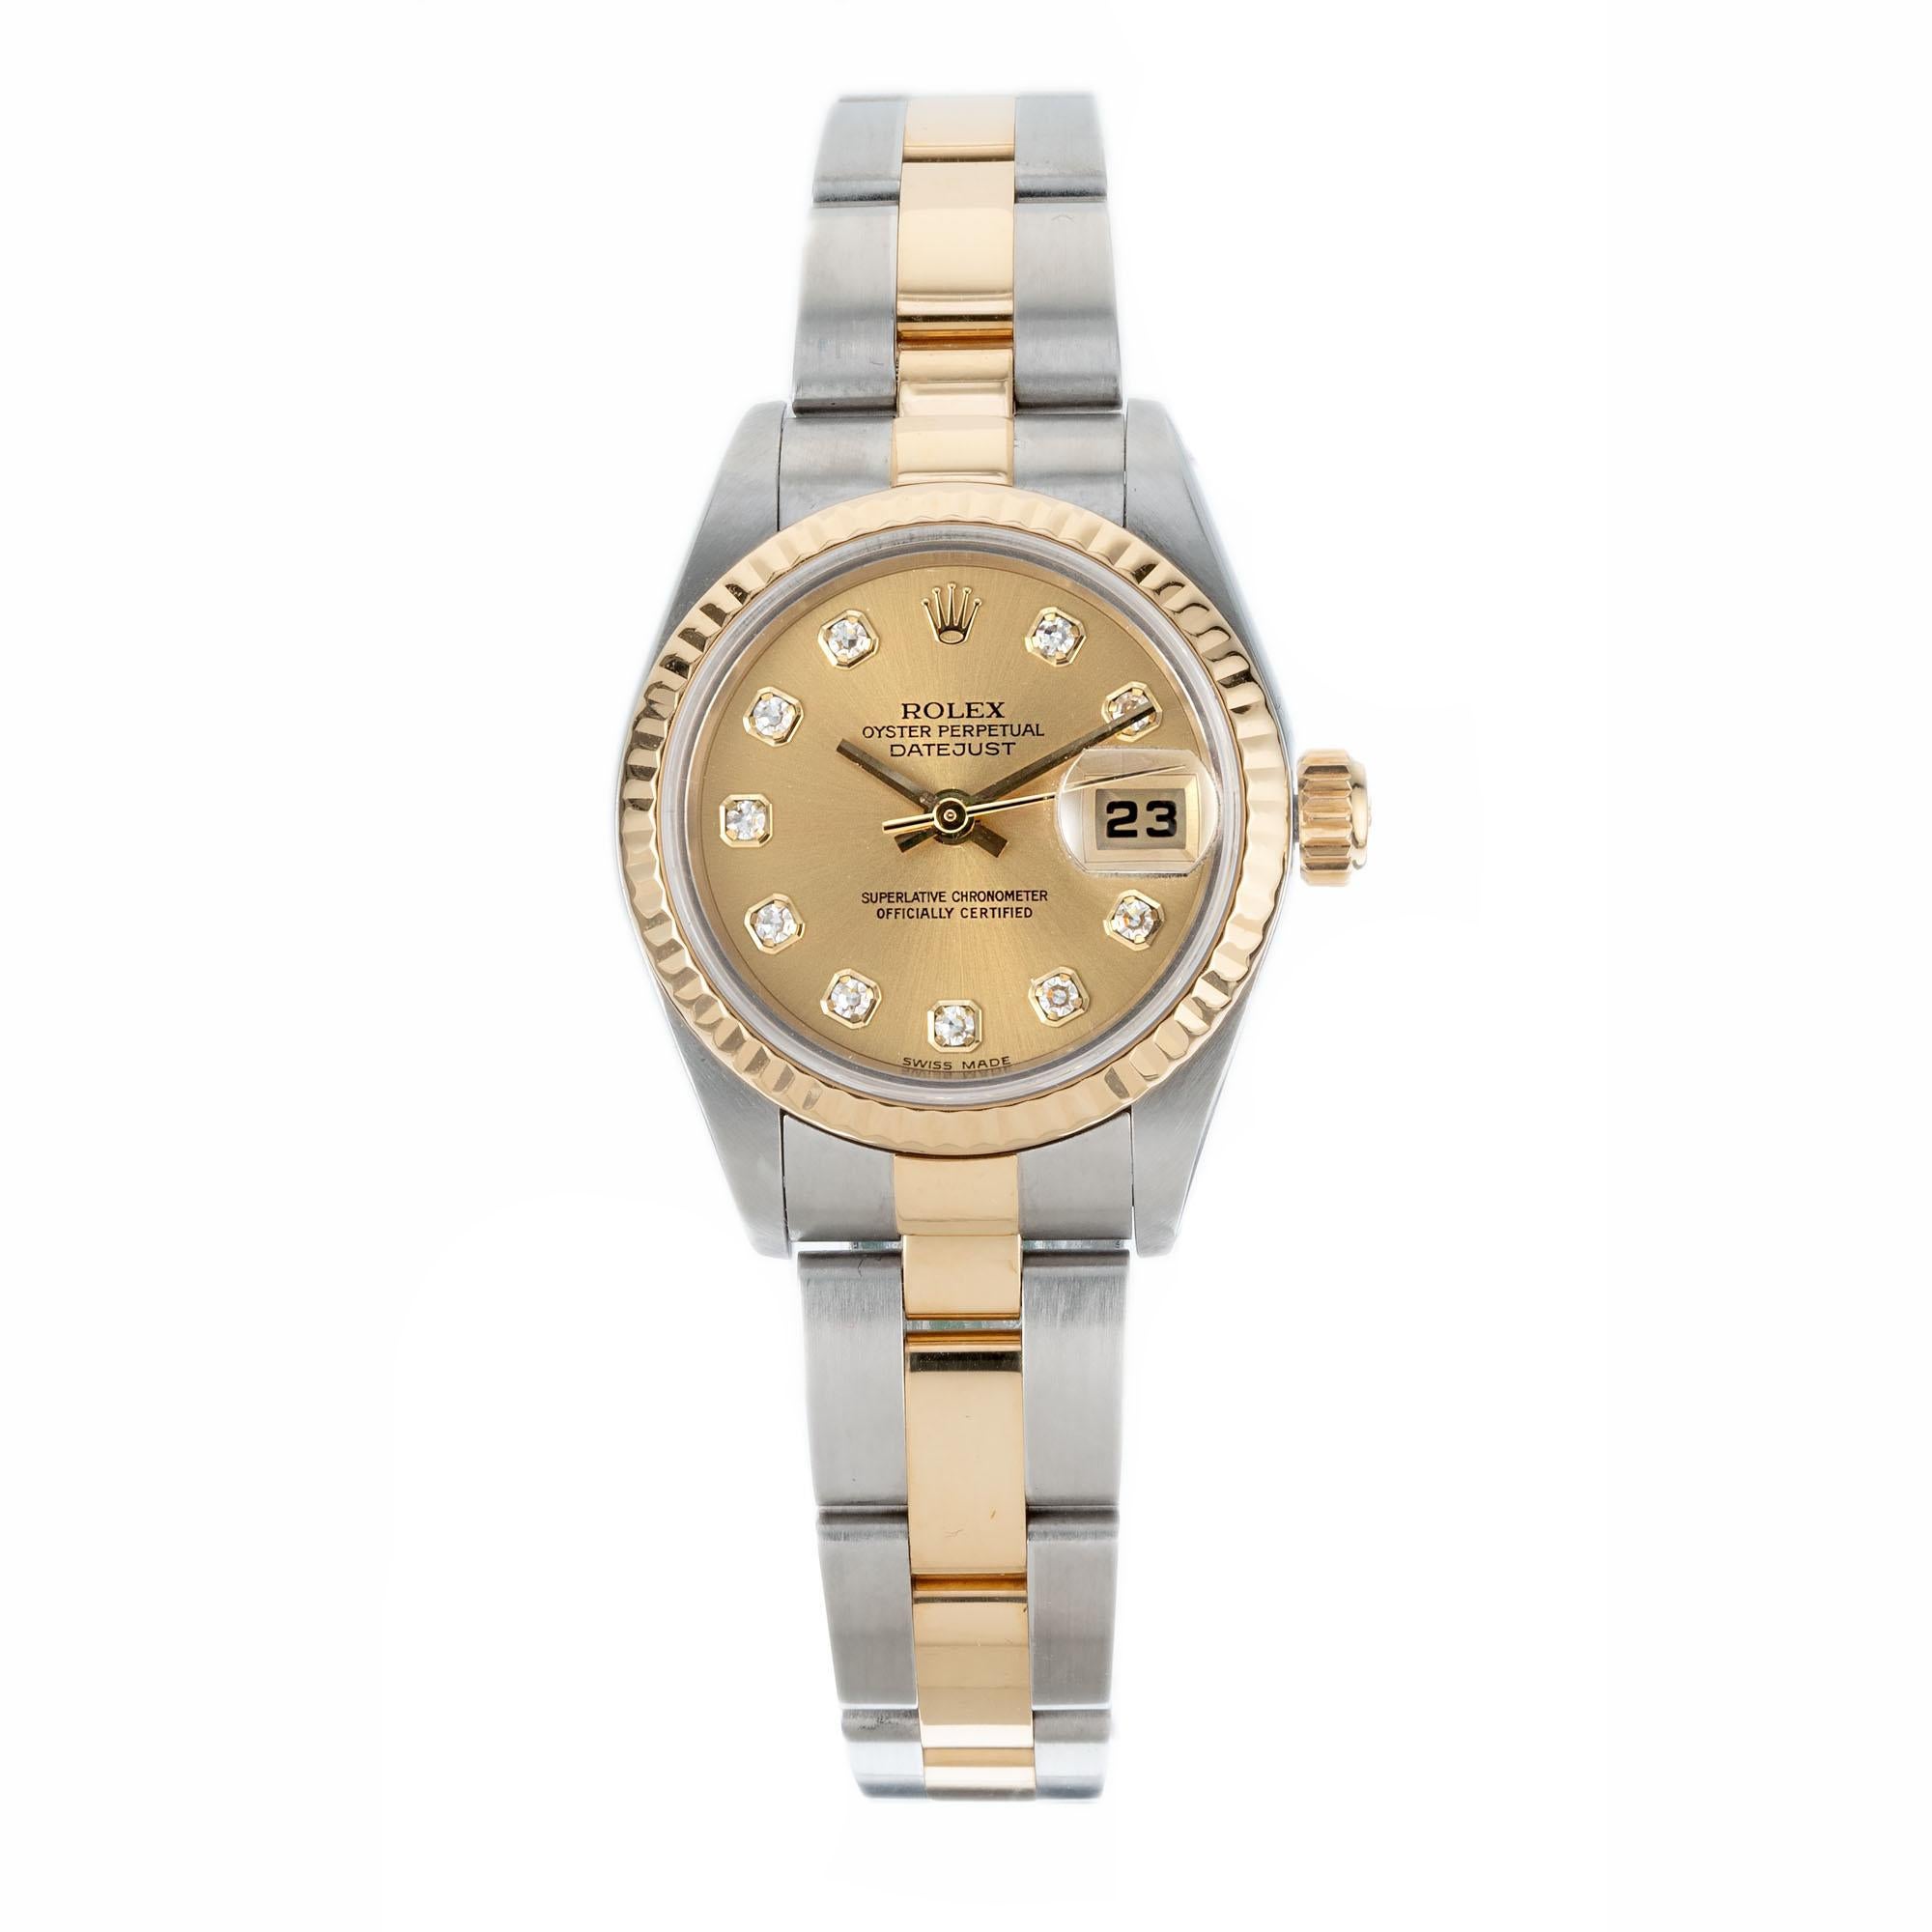 All factory original, ladies diamond dial Rolex Datejust, 18k yellow gold and steel. Fits a 7.5 Inch wrist and easily shortened. Original box and papers. 

Length: 33.15
Width: 26mm
Band width at case: 13mm
Case thickness: 10.68mm
Band: 2 tone